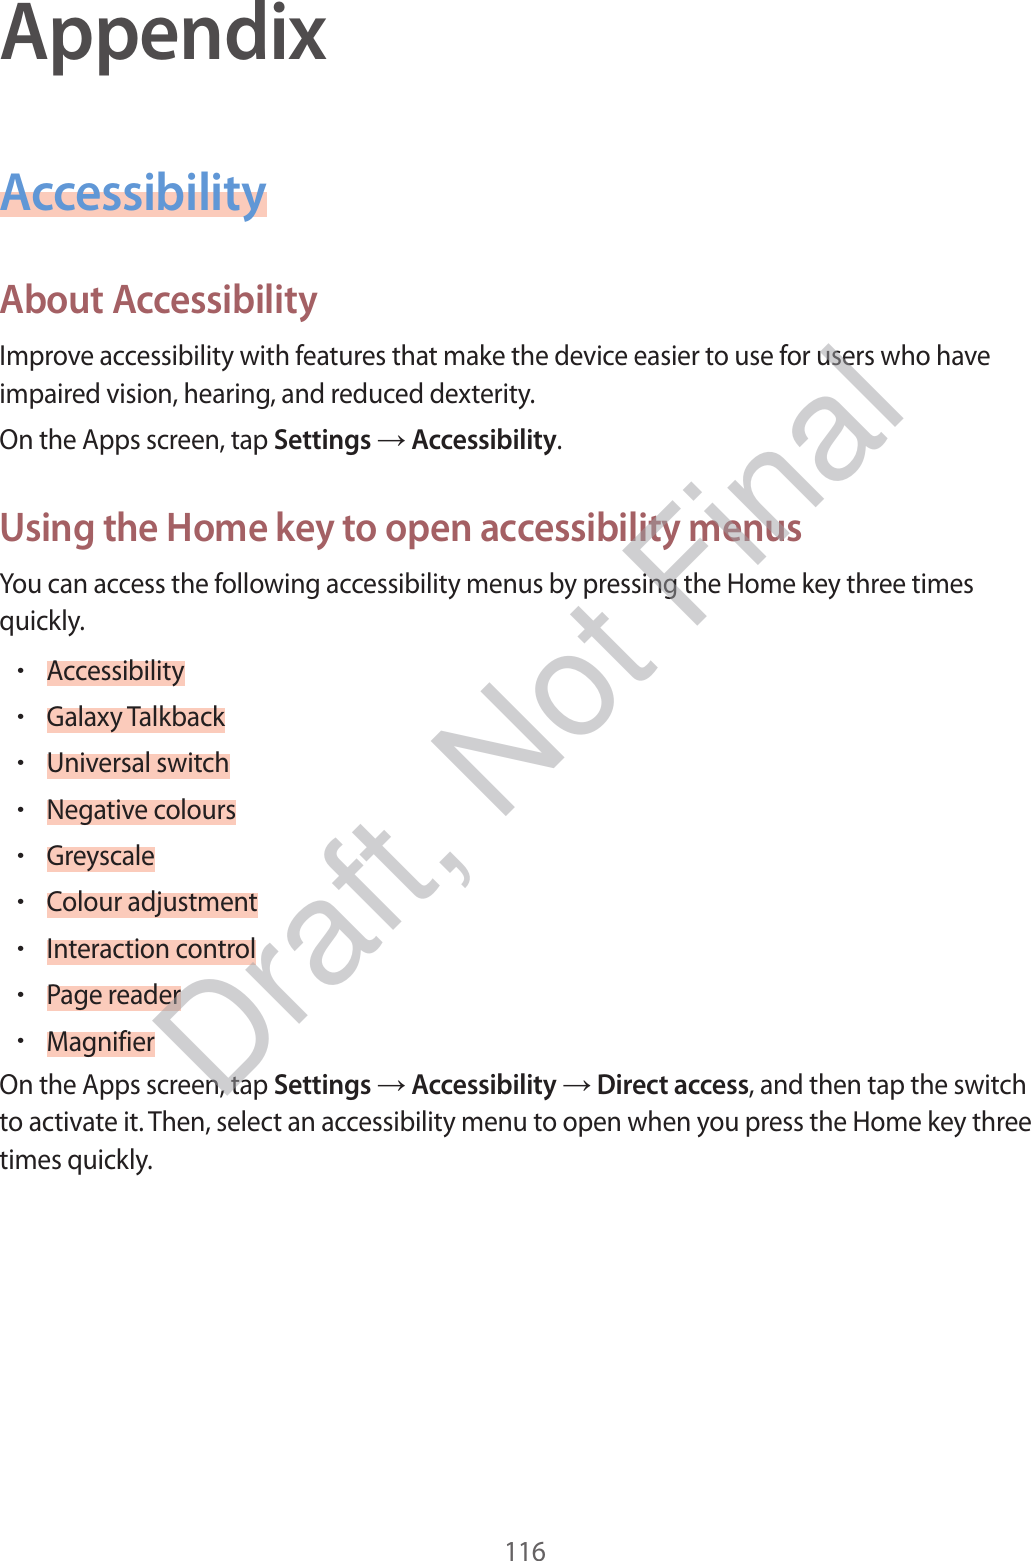 116AppendixAccessibilityAbout AccessibilityImprove accessibility with features that make the device easier to use for users who have impaired vision, hearing, and reduced dexterity.On the Apps screen, tap Settings  Accessibility.Using the Home key to open accessibility menusYou can access the following accessibility menus by pressing the Home key three times quickly.•Accessibility•Galaxy Talkback•Universal switch•Negative colours•Greyscale•Colour adjustment•Interaction control•Page reader•MagnifierOn the Apps screen, tap Settings  Accessibility  Direct access, and then tap the switch to activate it. Then, select an accessibility menu to open when you press the Home key three times quickly.Draft, Not Final